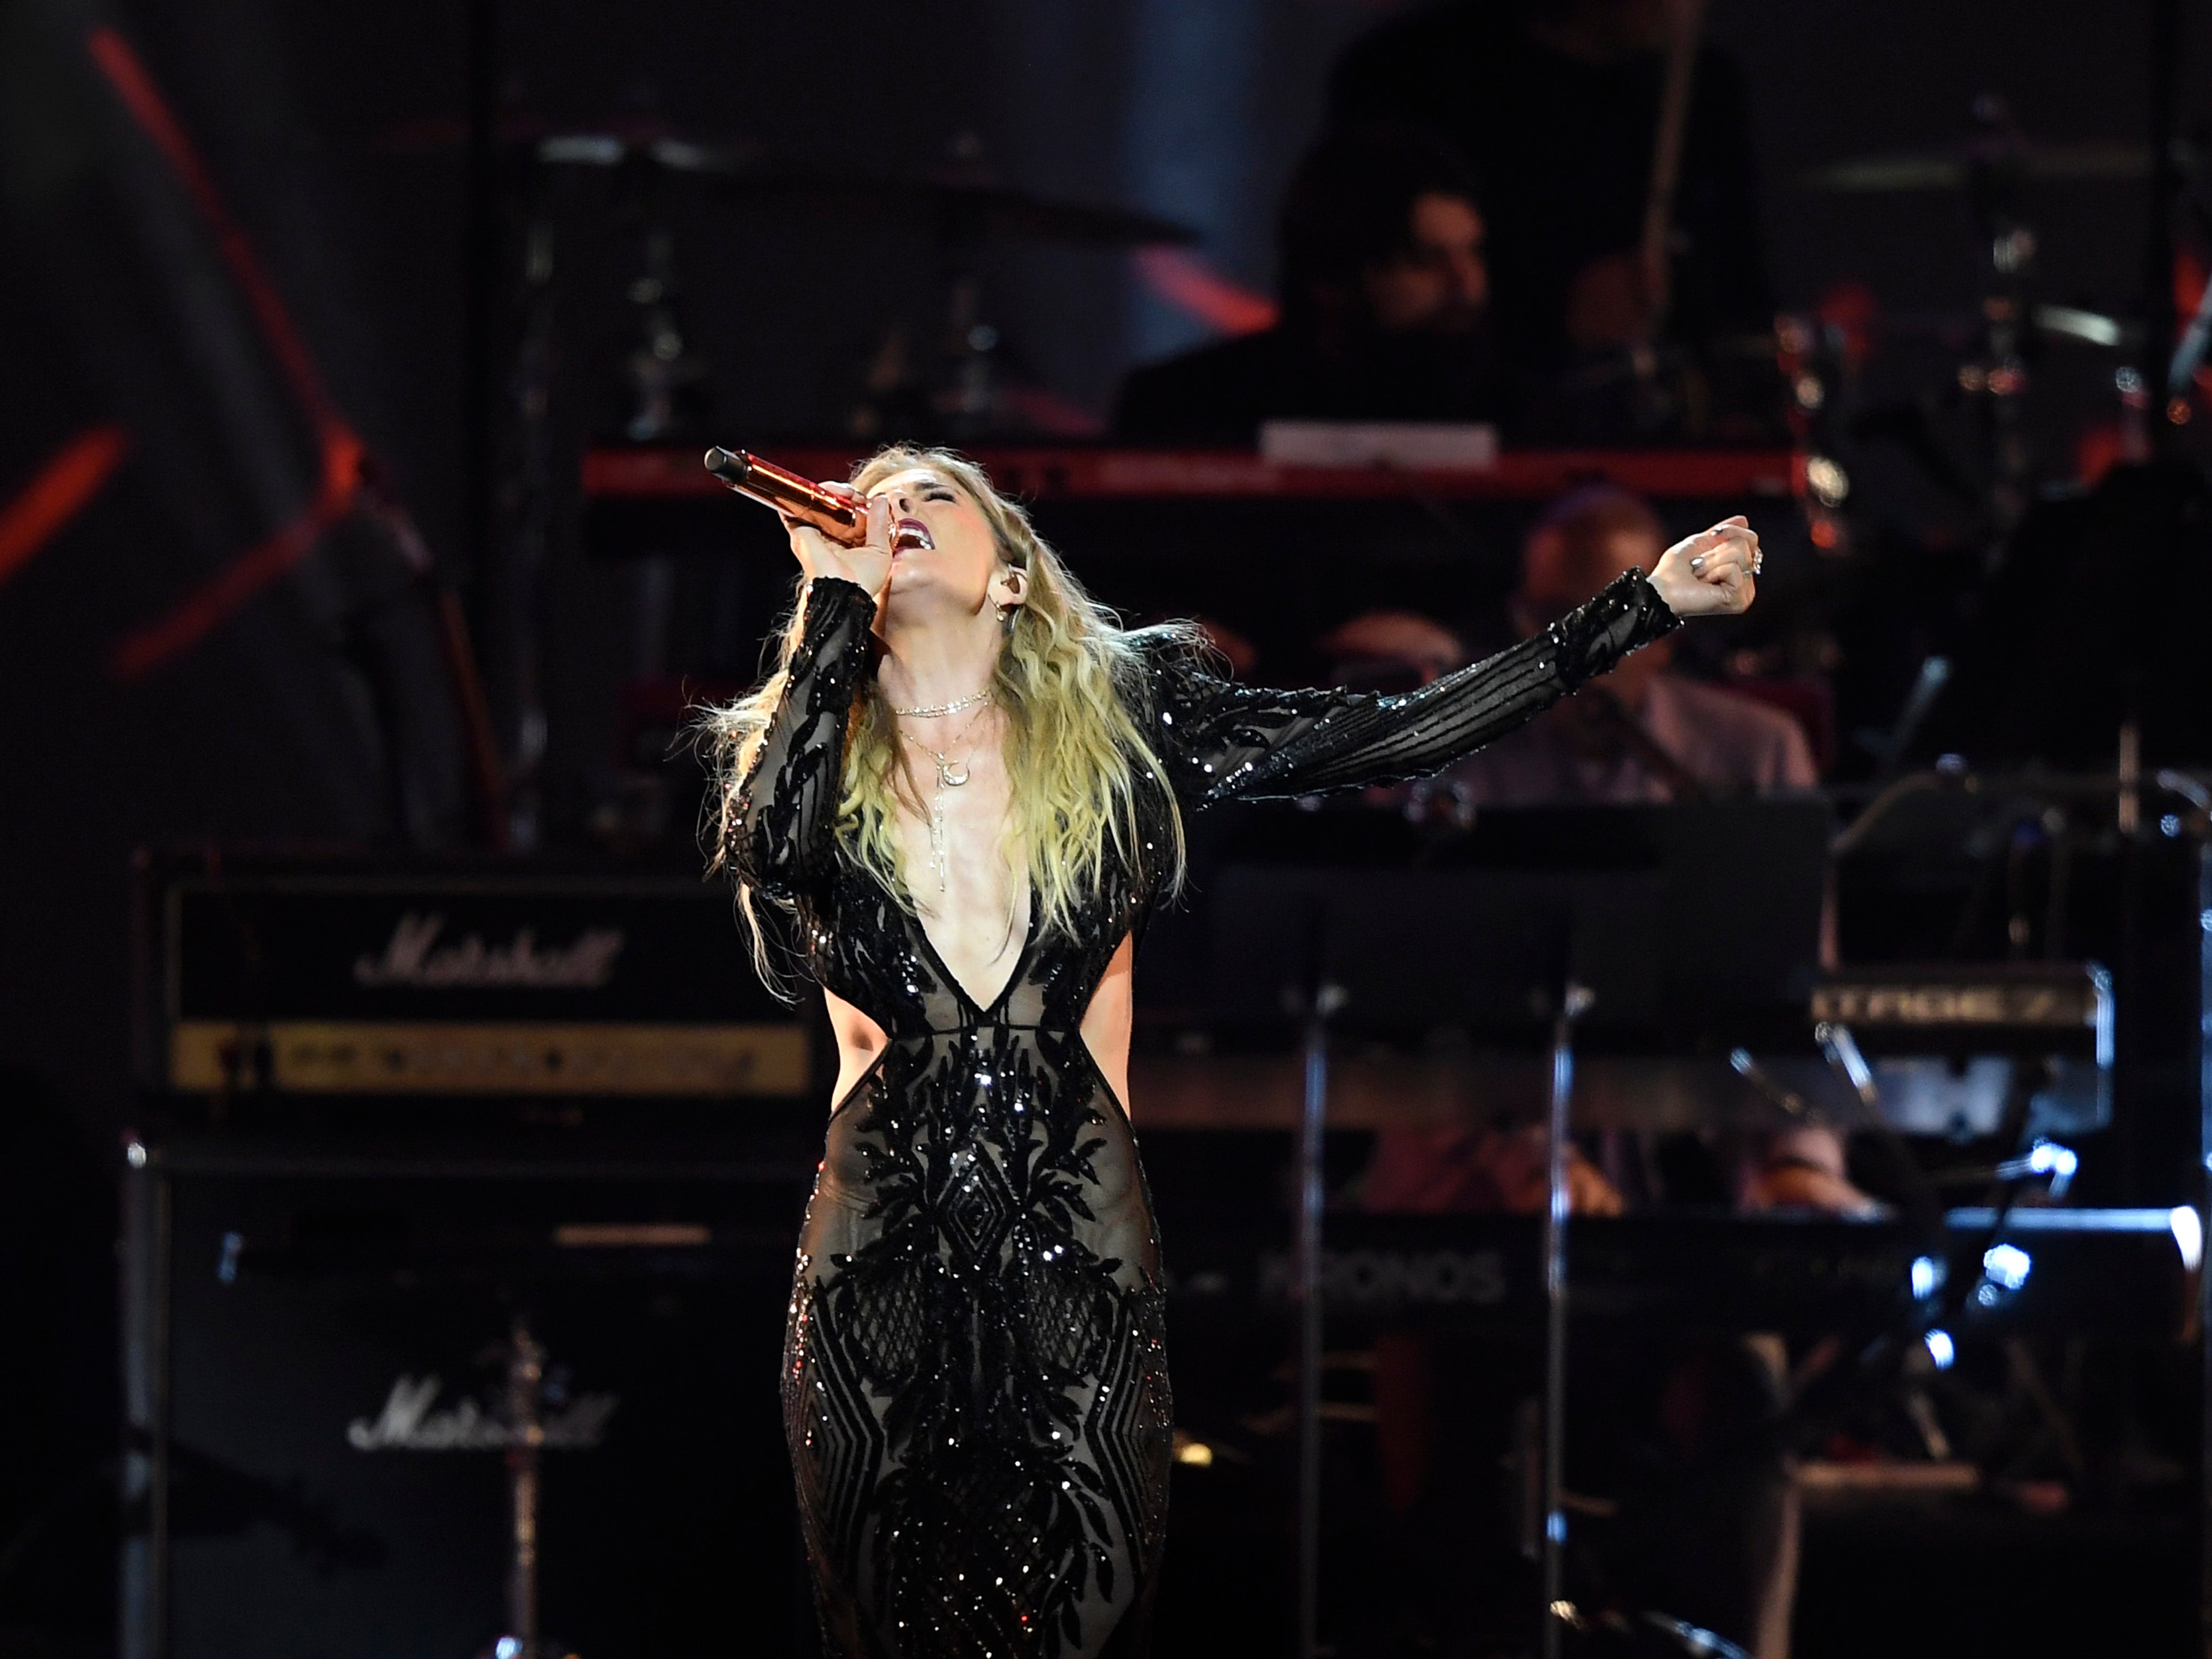 Rimes performing at MusiCares Person of the Year in 2020